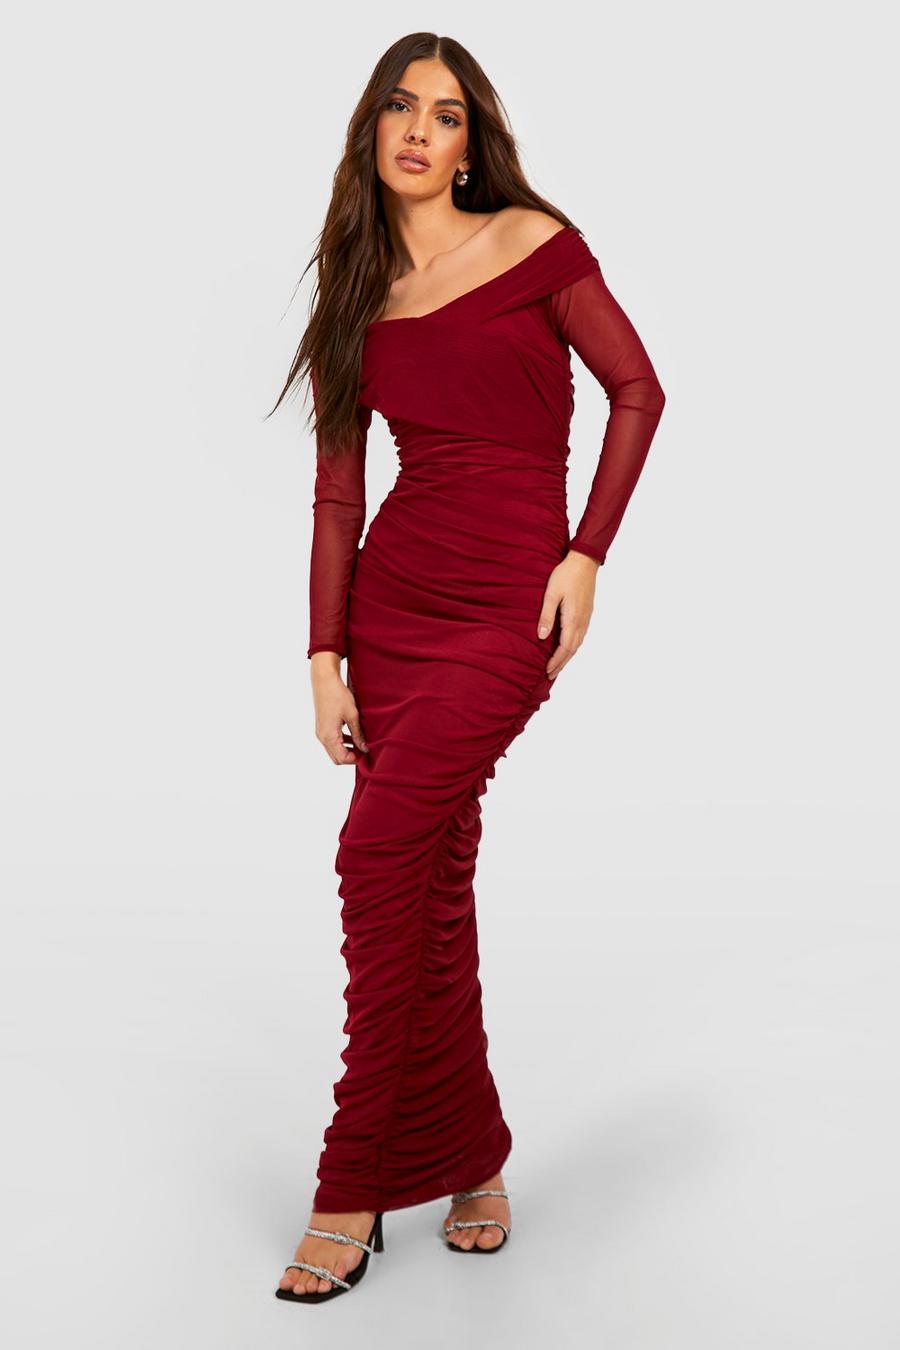 Maroon red Rouched Mesh Off The Shoulder Maxi Dress